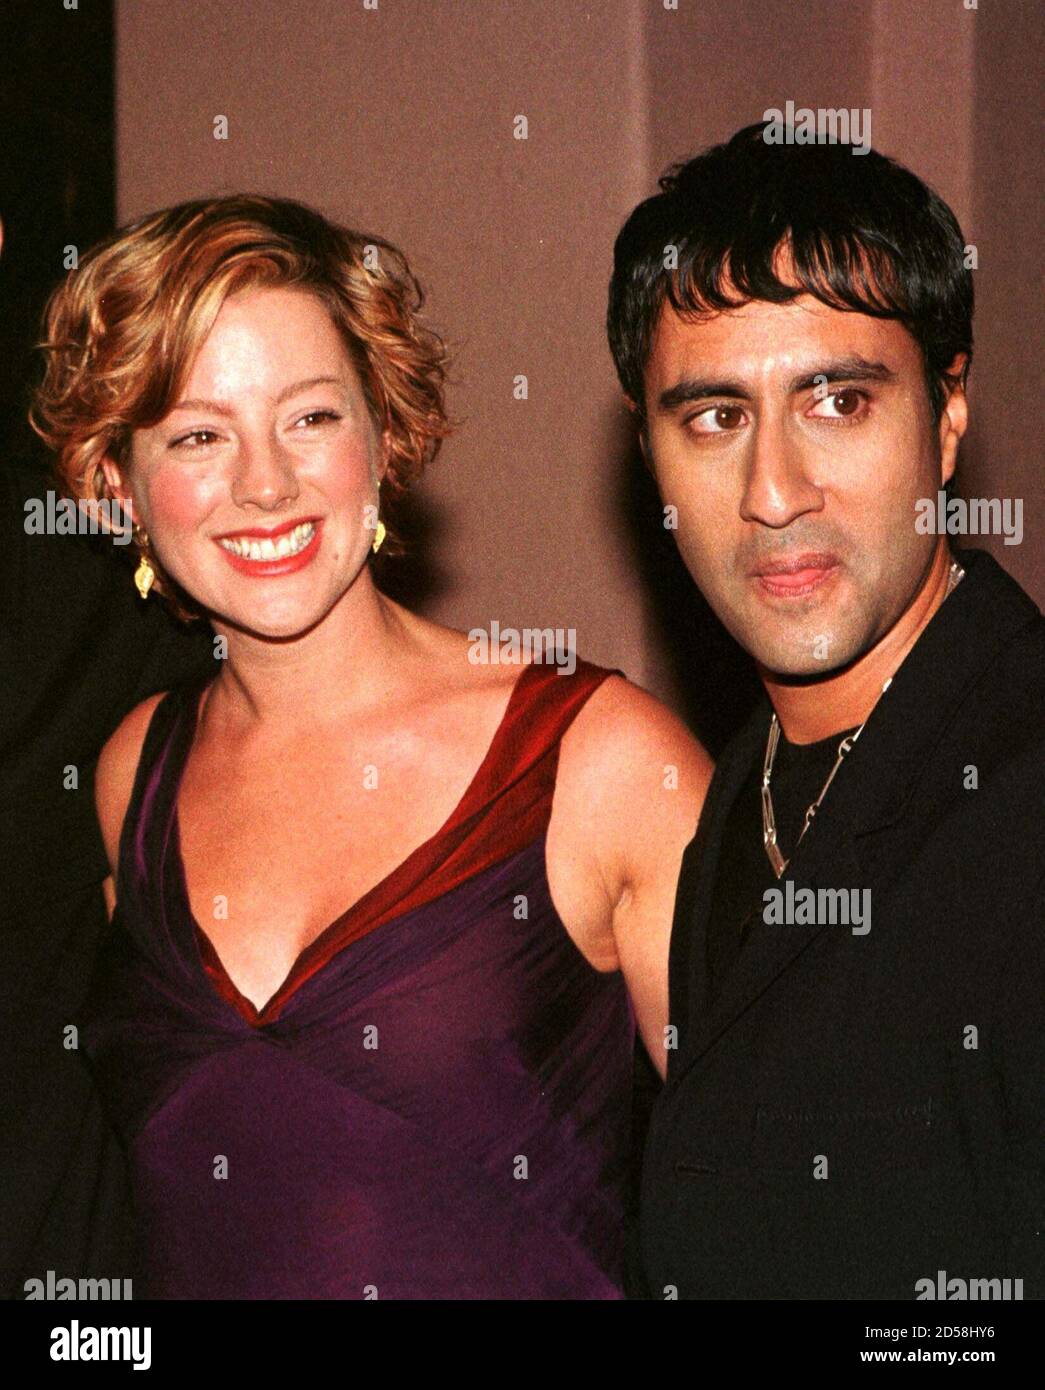 Singer Sarah McLachlan and husband Ash Sood arrive the Arista Records pre-Grammy party February 23. McLachlan a Grammy nominee for Best Female Pop Vocal for recording " Adia." The